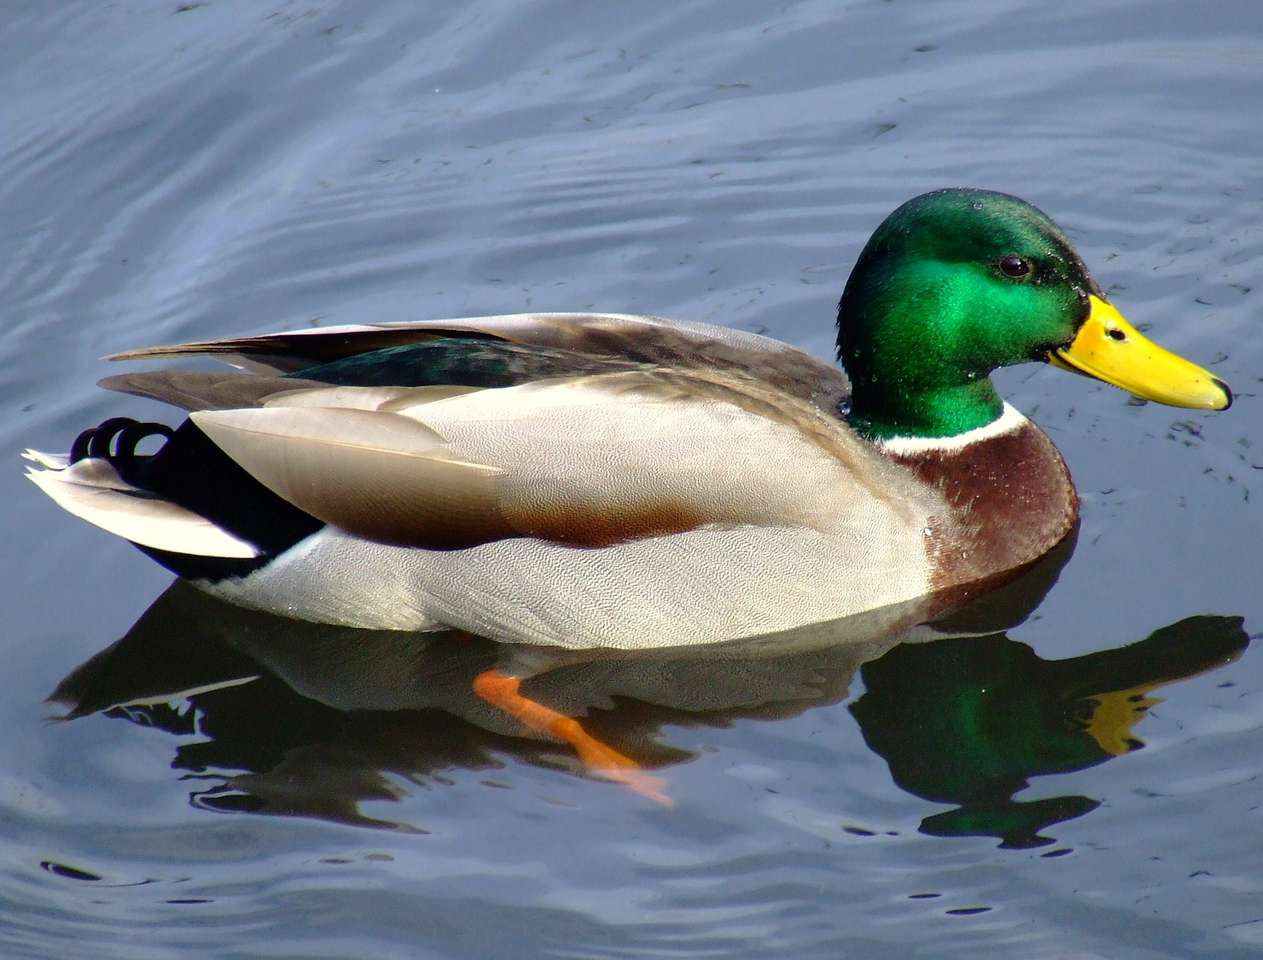 It's a duck puzzle online from photo